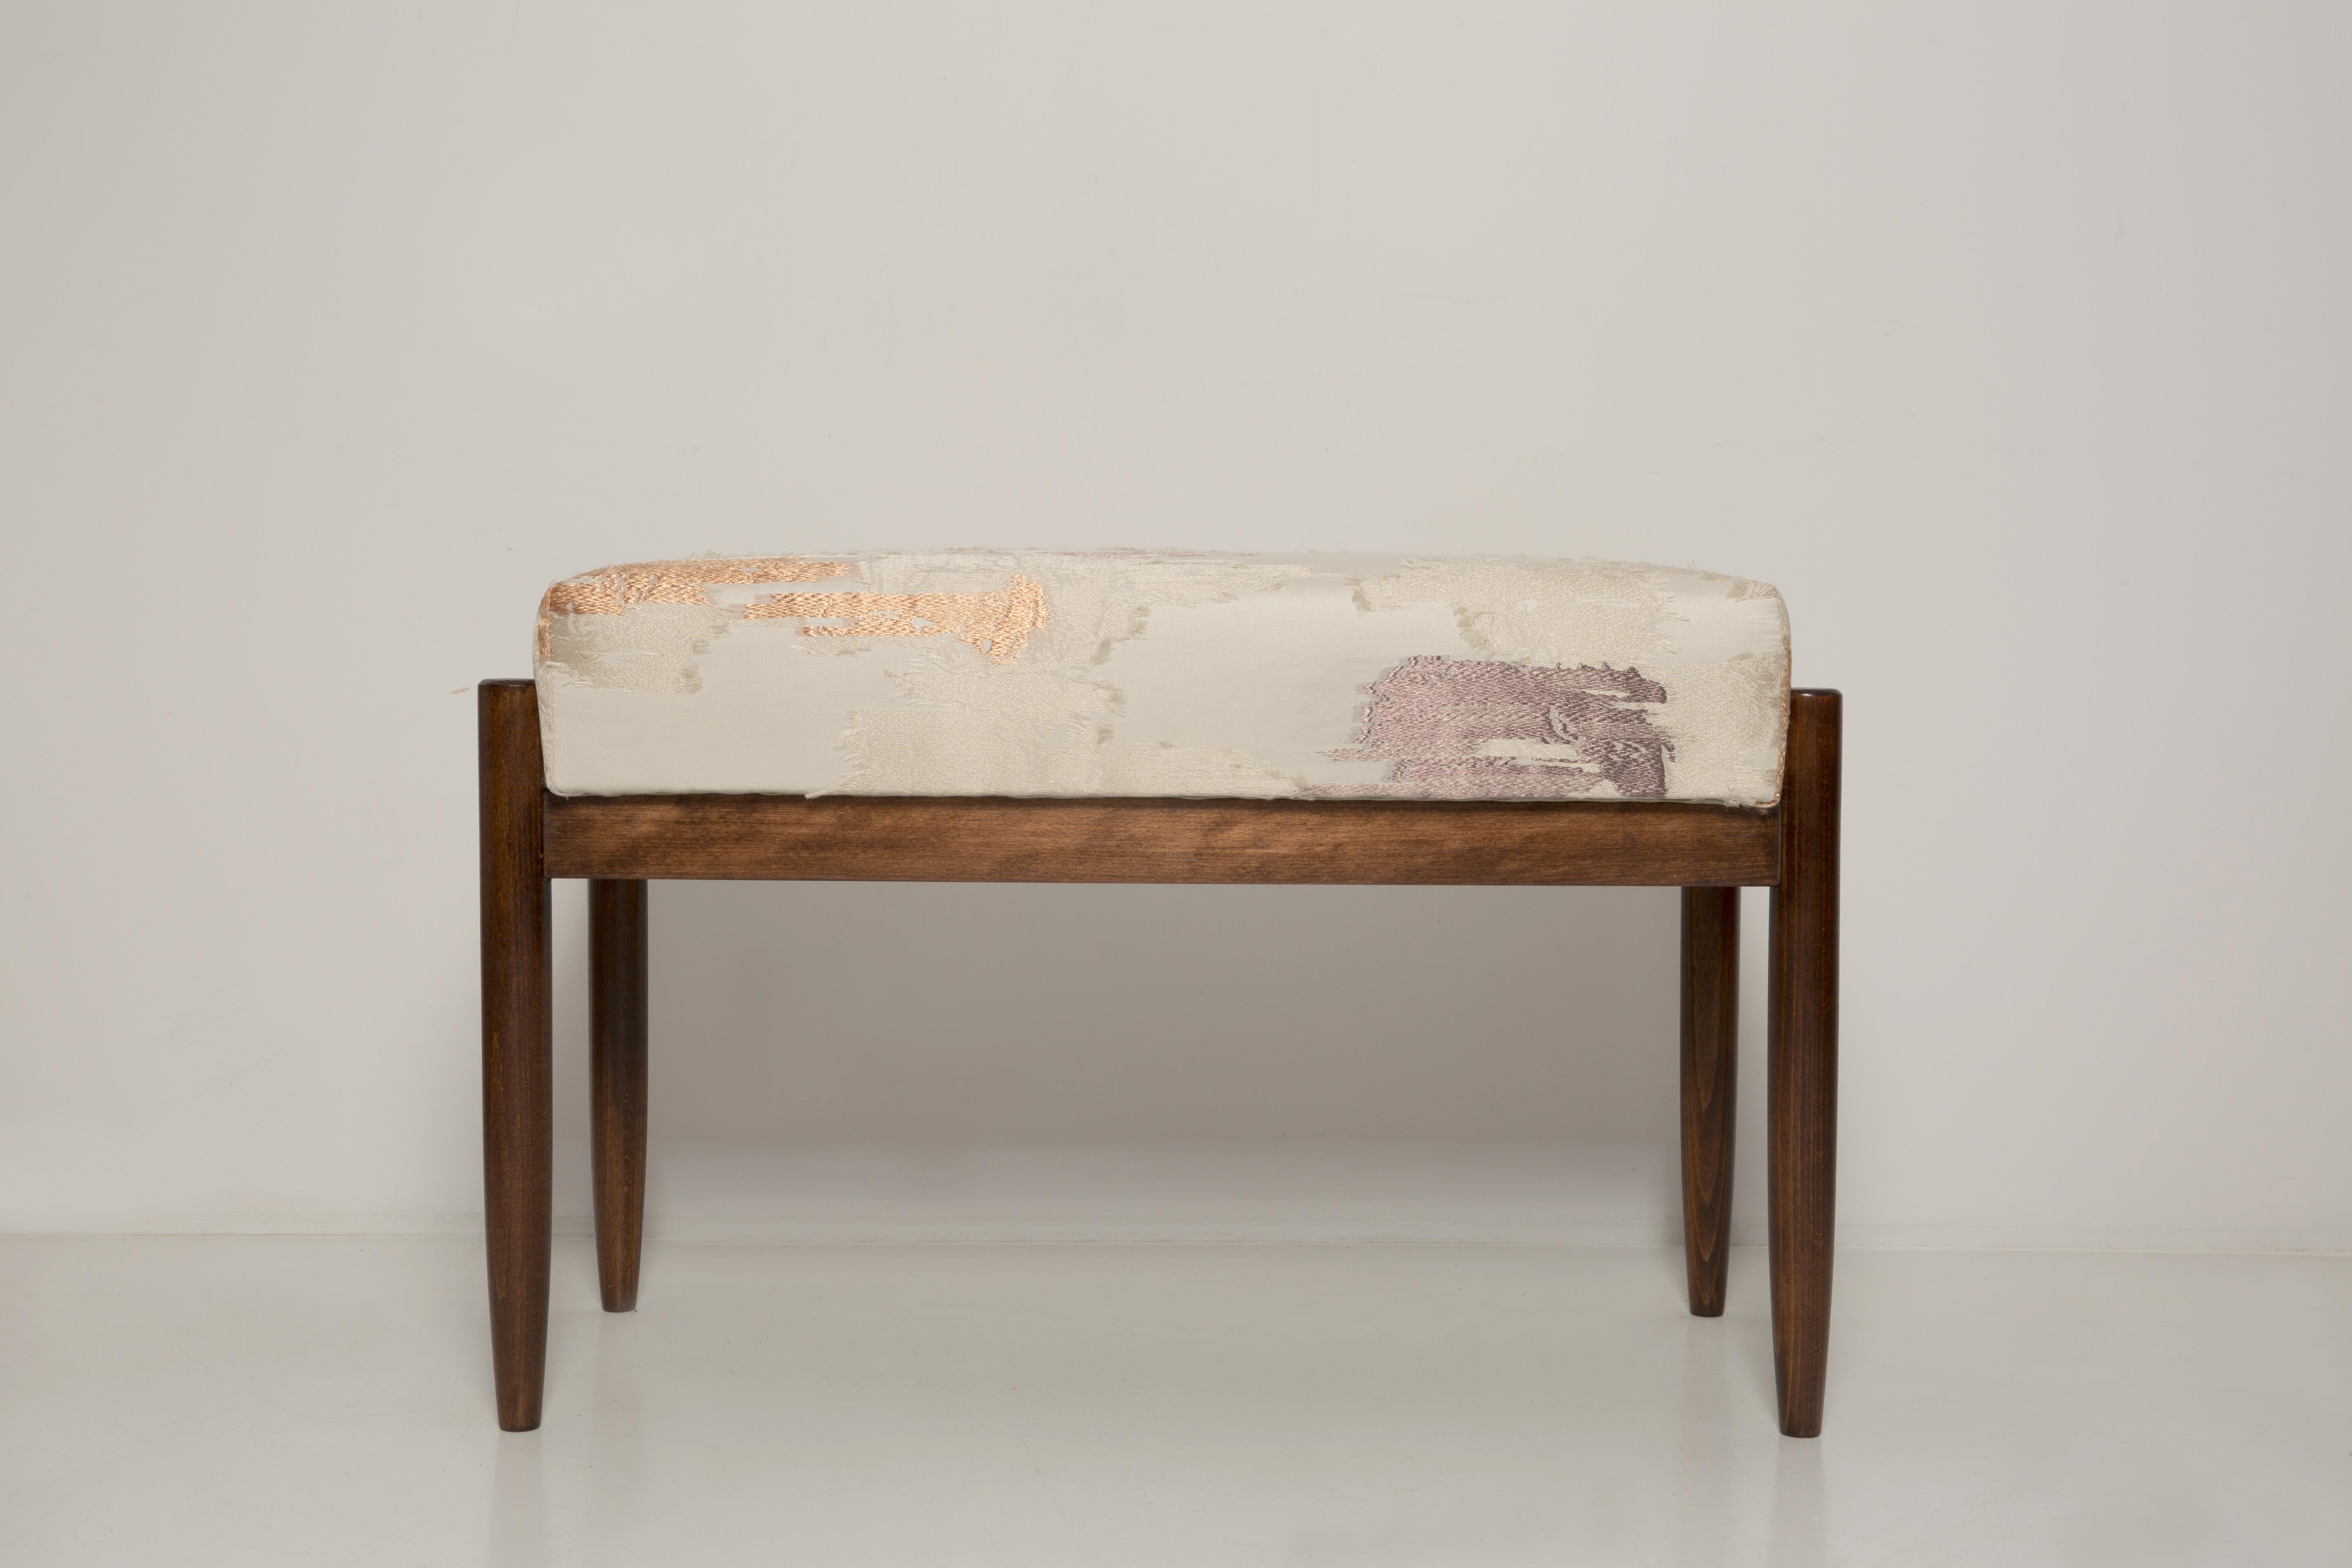 Contemporary Bench inspired of 1960s style. The bench consist of an upholstered part, a seat and wooden legs narrowing downwards, characteristic of the 1960s style.

Bench was designed by Vintola Studio, a Polish brand created by Ola Szewczul,